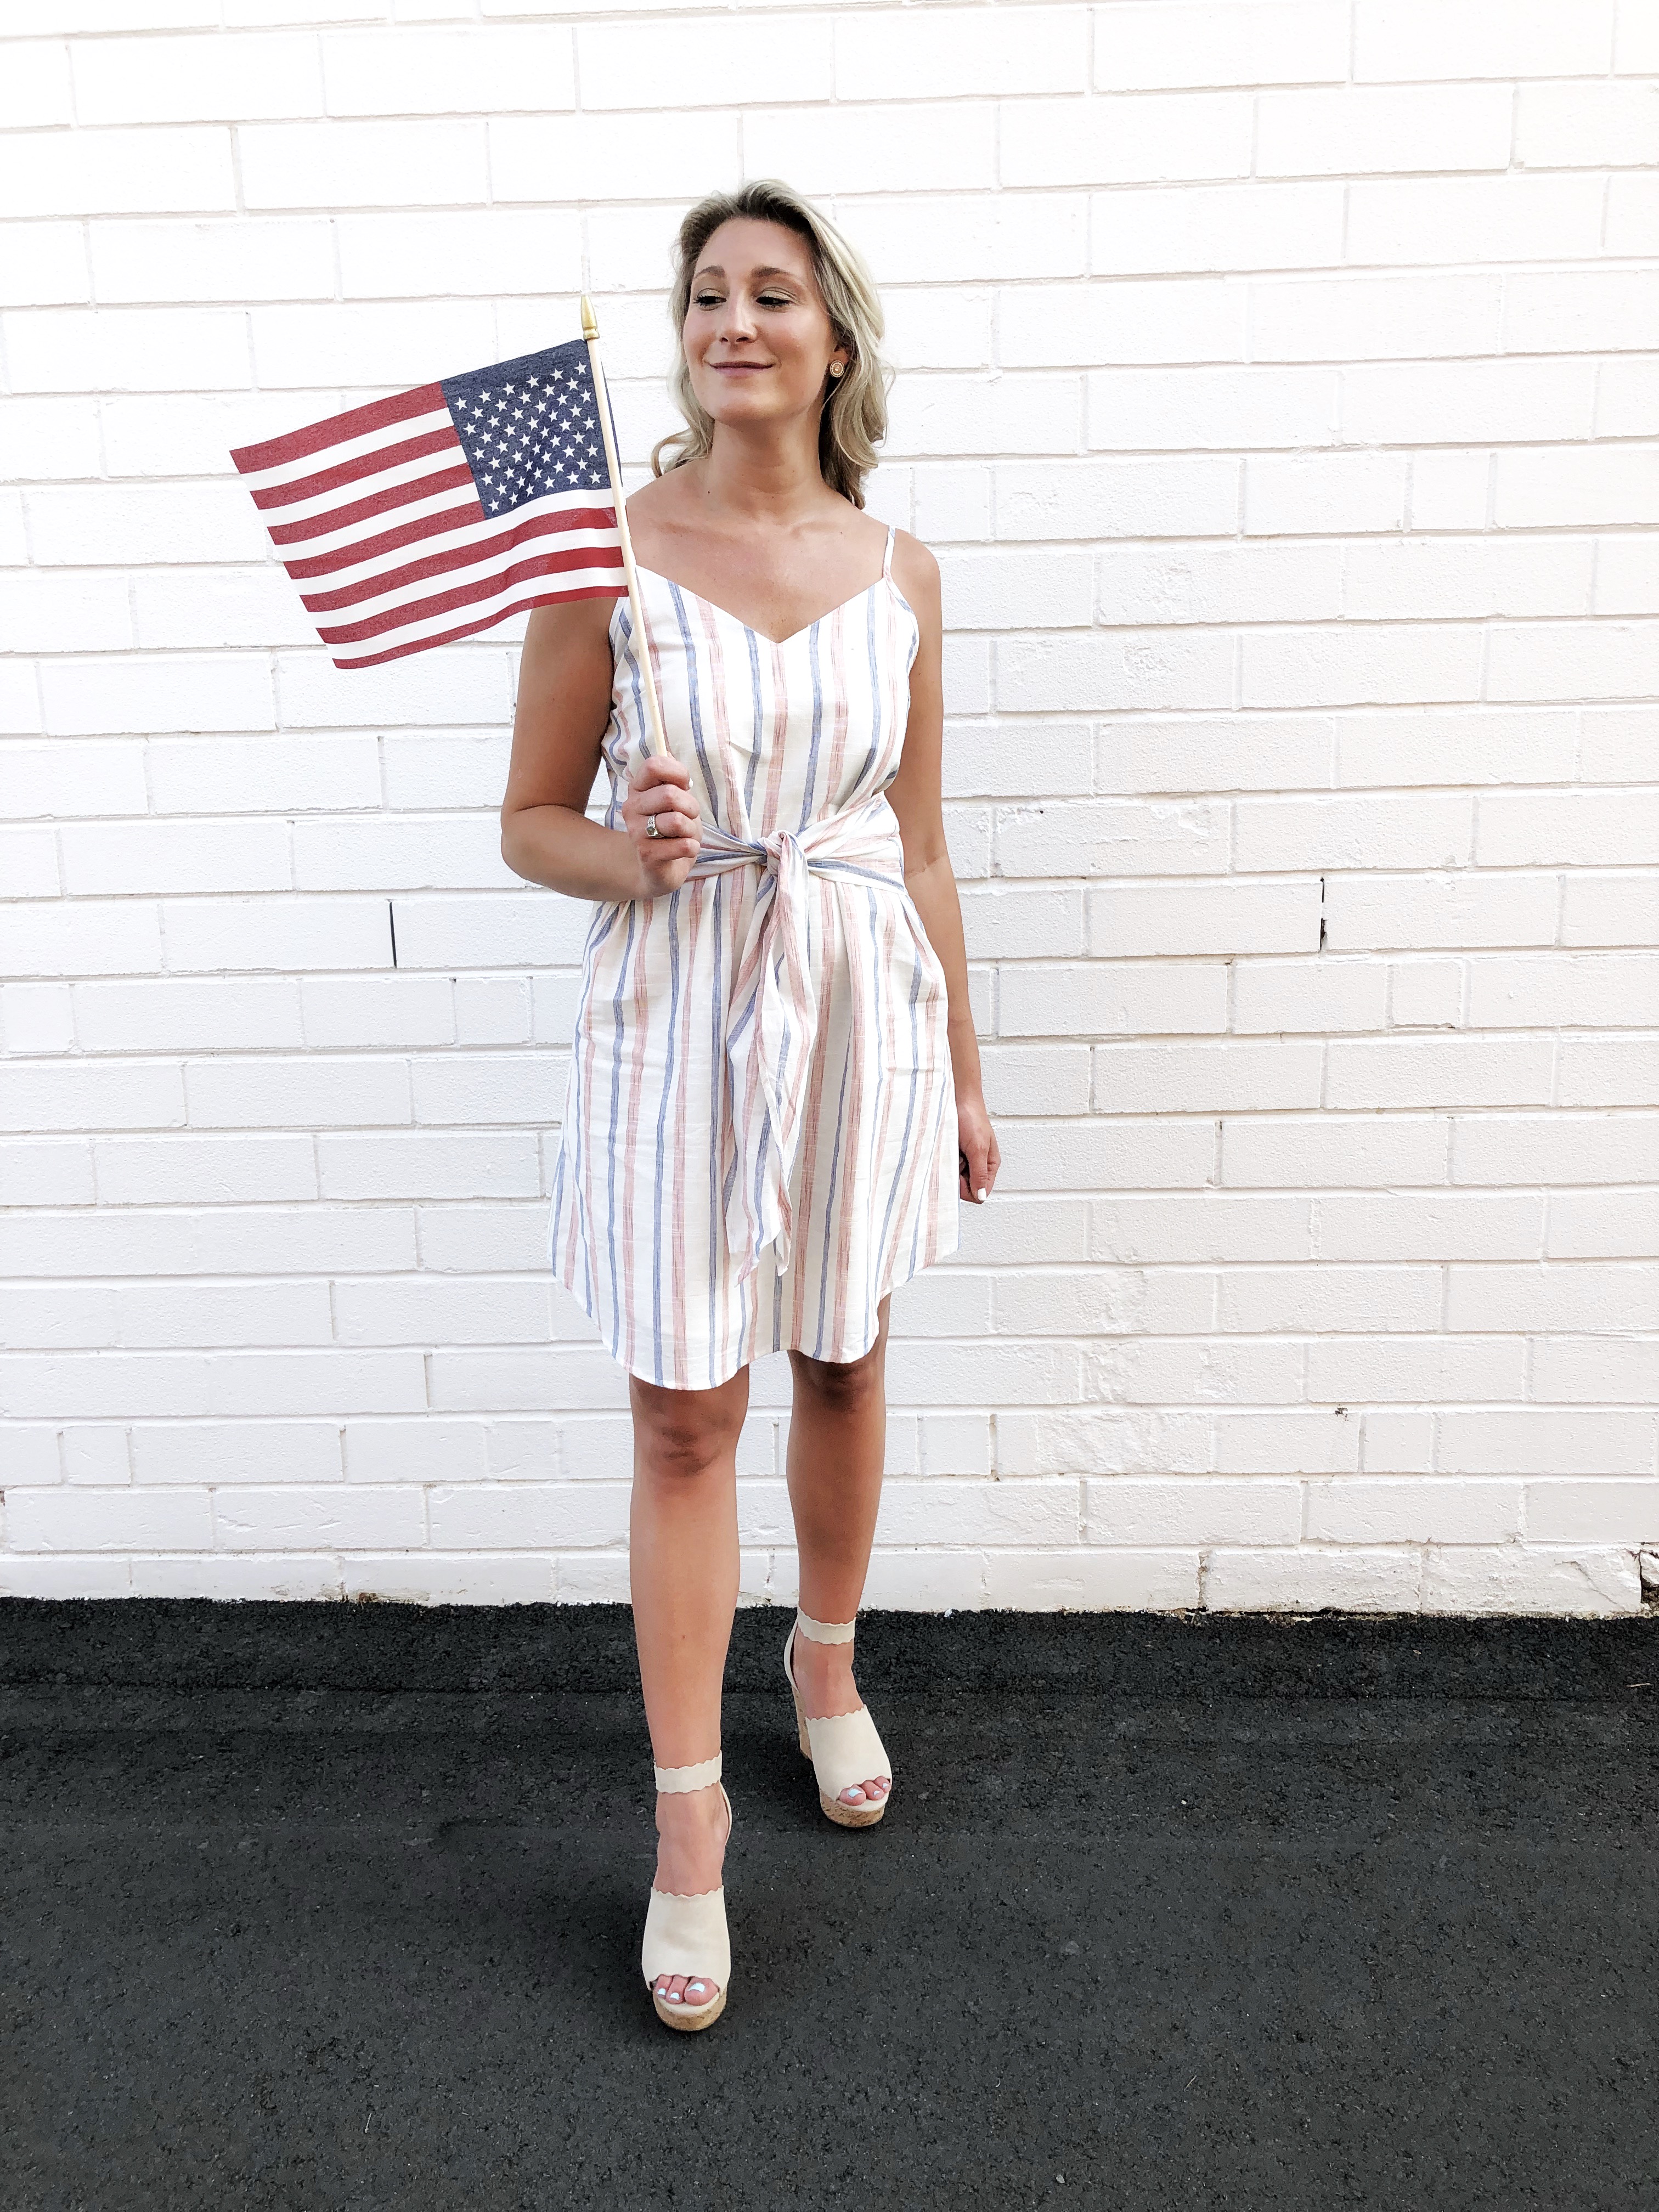 Red, white and blues dress 